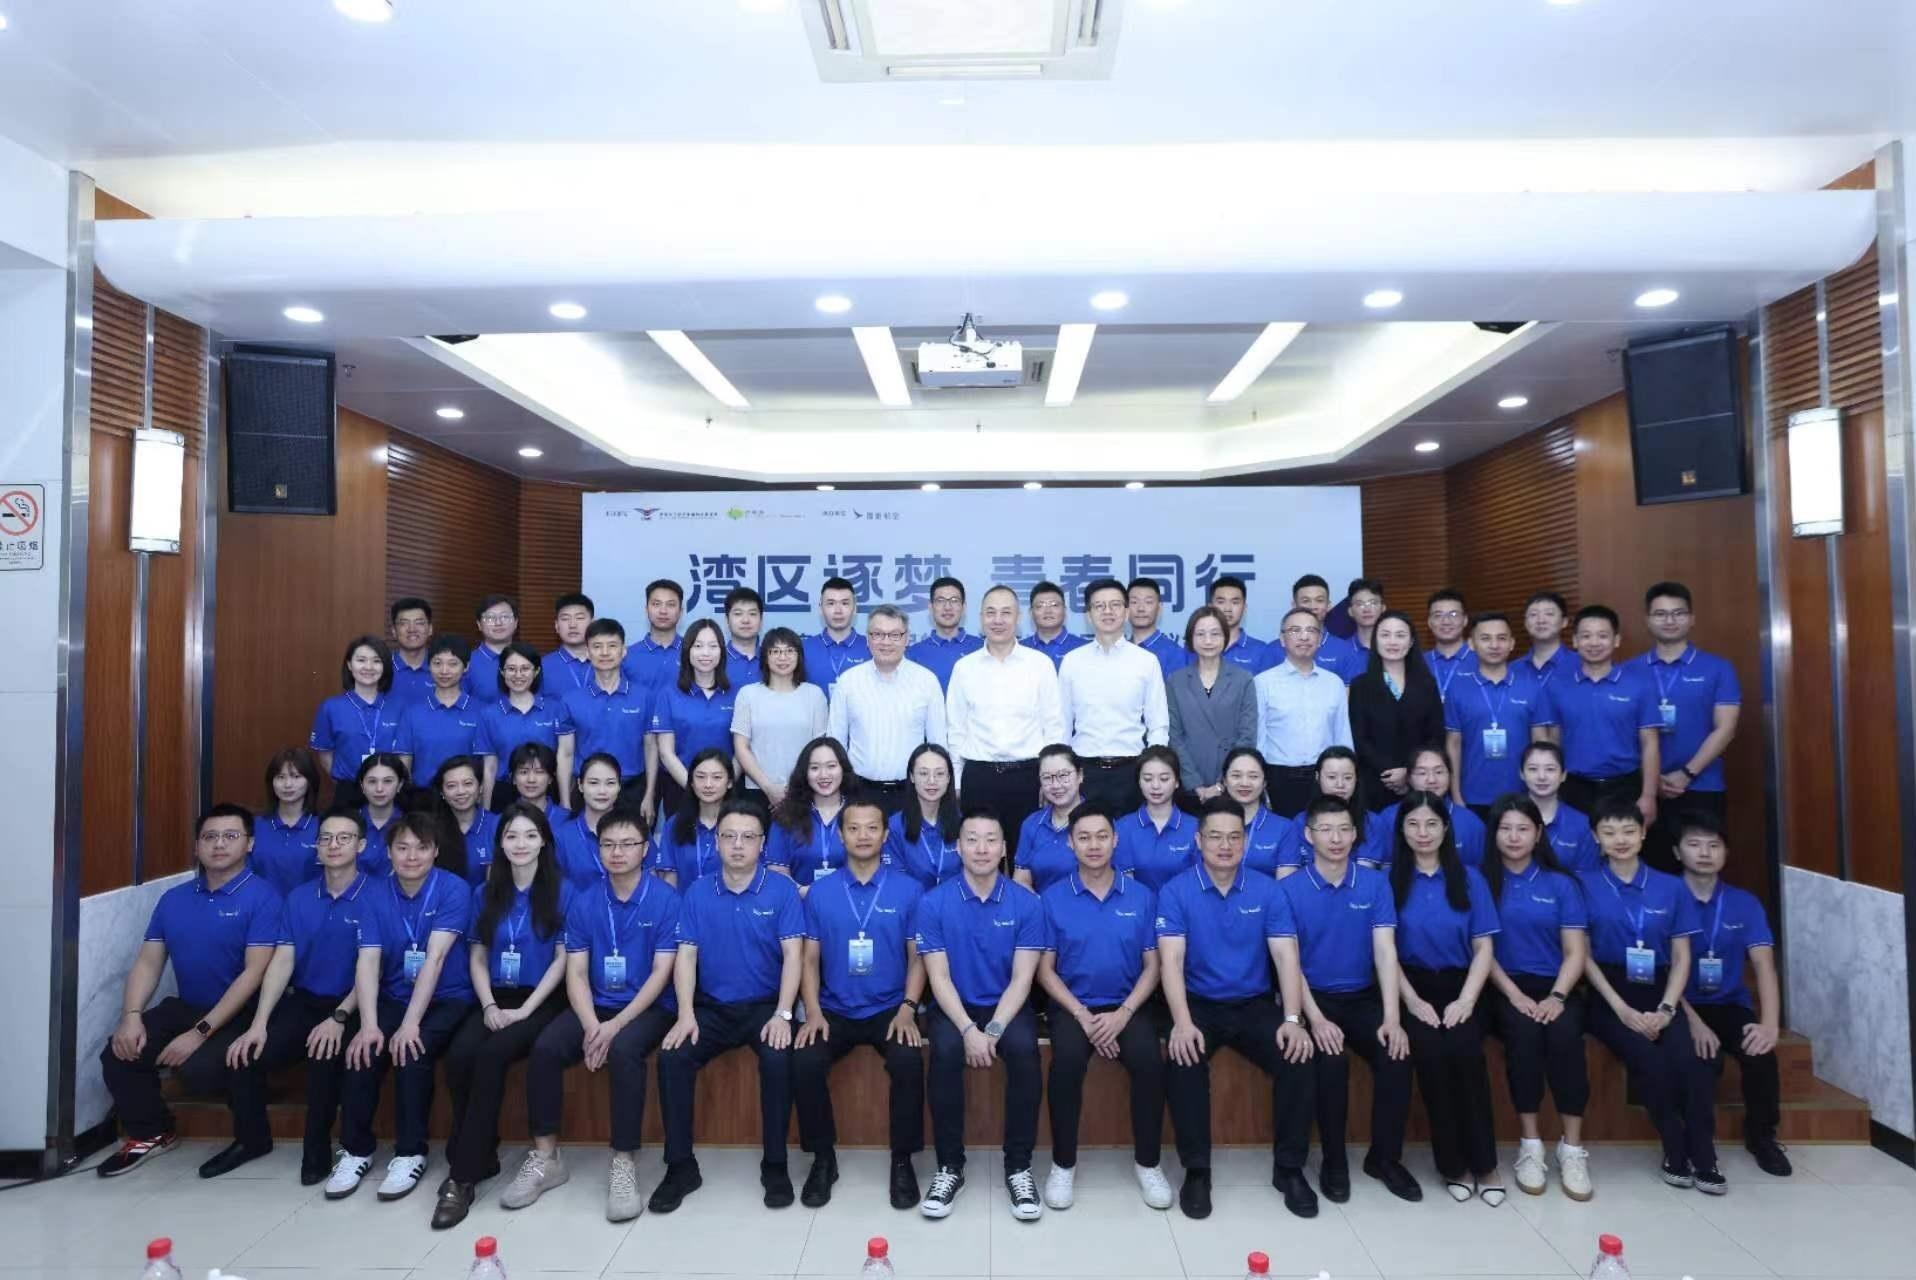 The Launching Ceremony of the Guangdong-Hong Kong-Macao Greater Bay Area Civil Aviation Youth Exchange Program (the Program), jointly organised by the Central and Southern Regional Administration of the Civil Aviation Administration of China (CAAC) and the Civil Aviation Department (CAD), took place in Guangzhou today (May 17). Photo shows officiating guests from the Central and Southern Regional Administration of the CAAC and the CAD, and participants of the first phase of the Program at the ceremony.